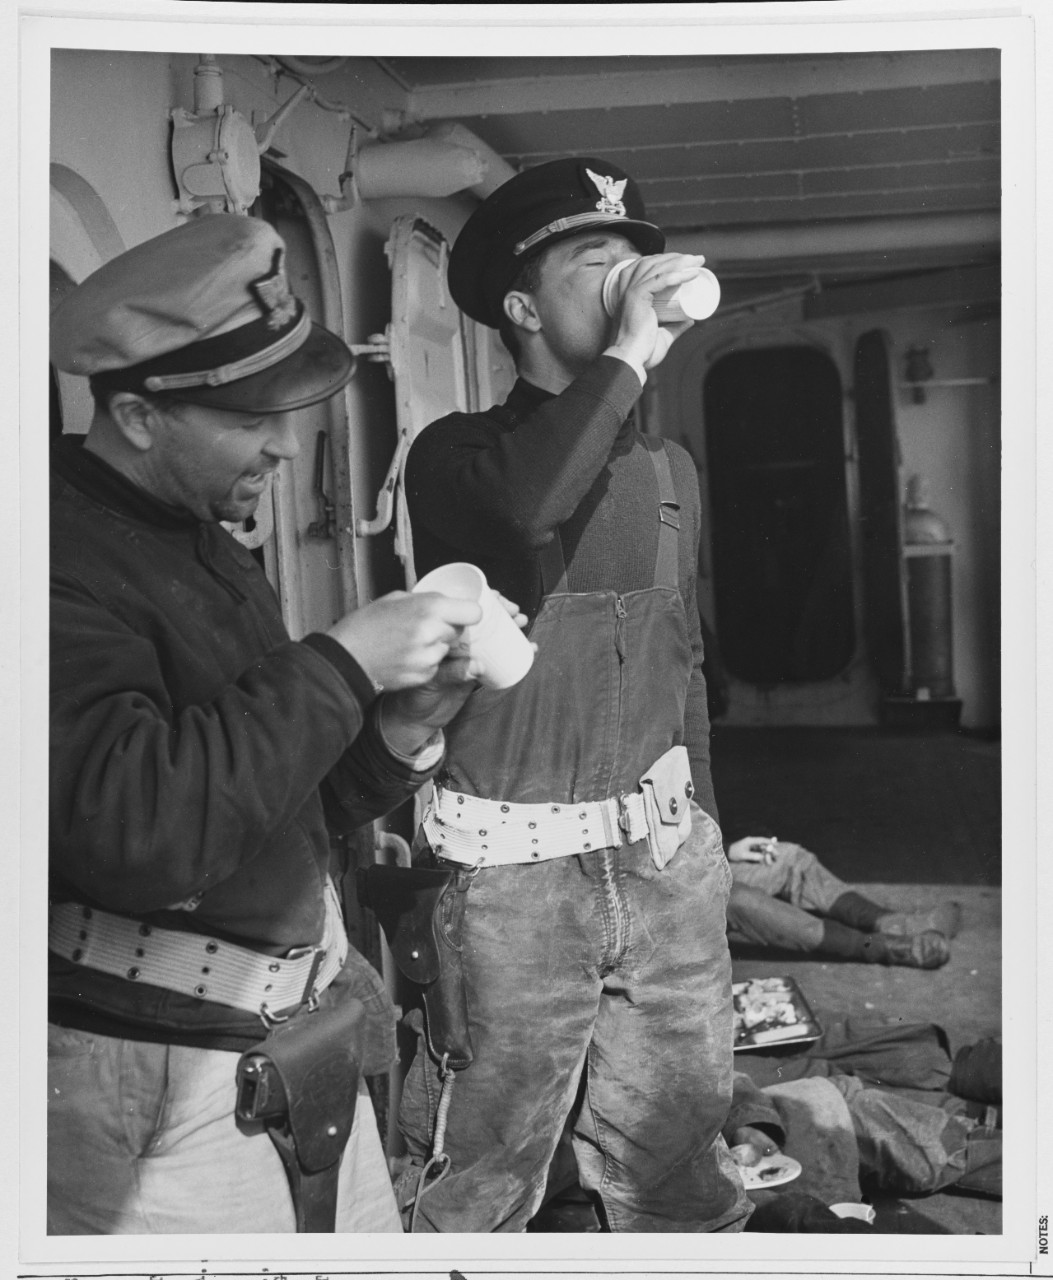 Snack time aboard the Victorious CAMPBELL after 12 hours of ramming U-Boats.